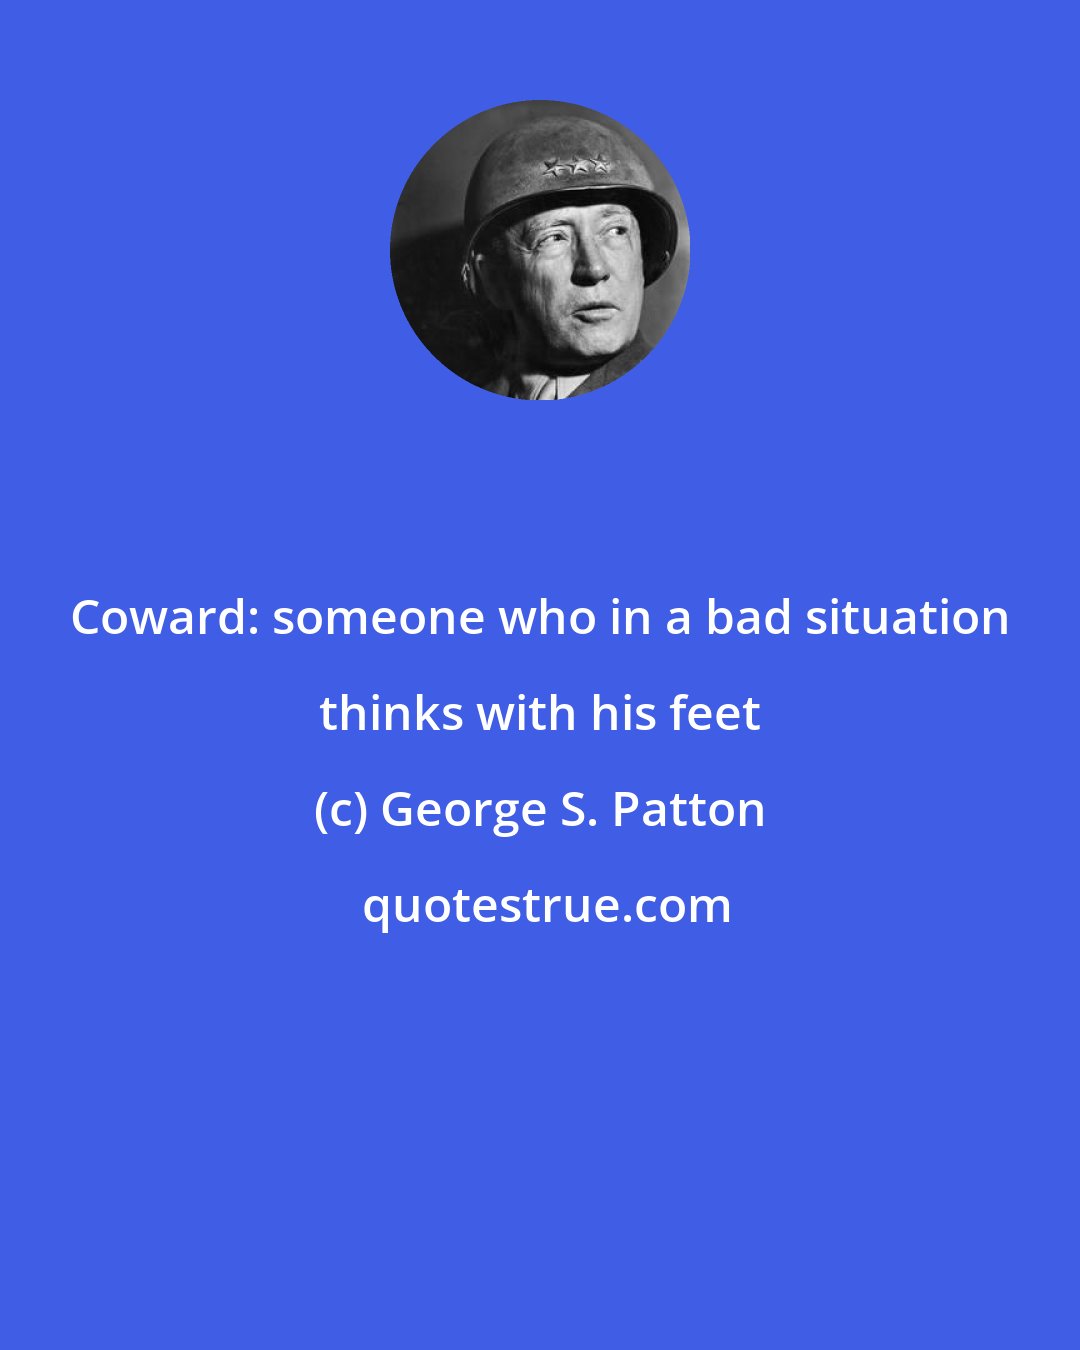 George S. Patton: Coward: someone who in a bad situation thinks with his feet